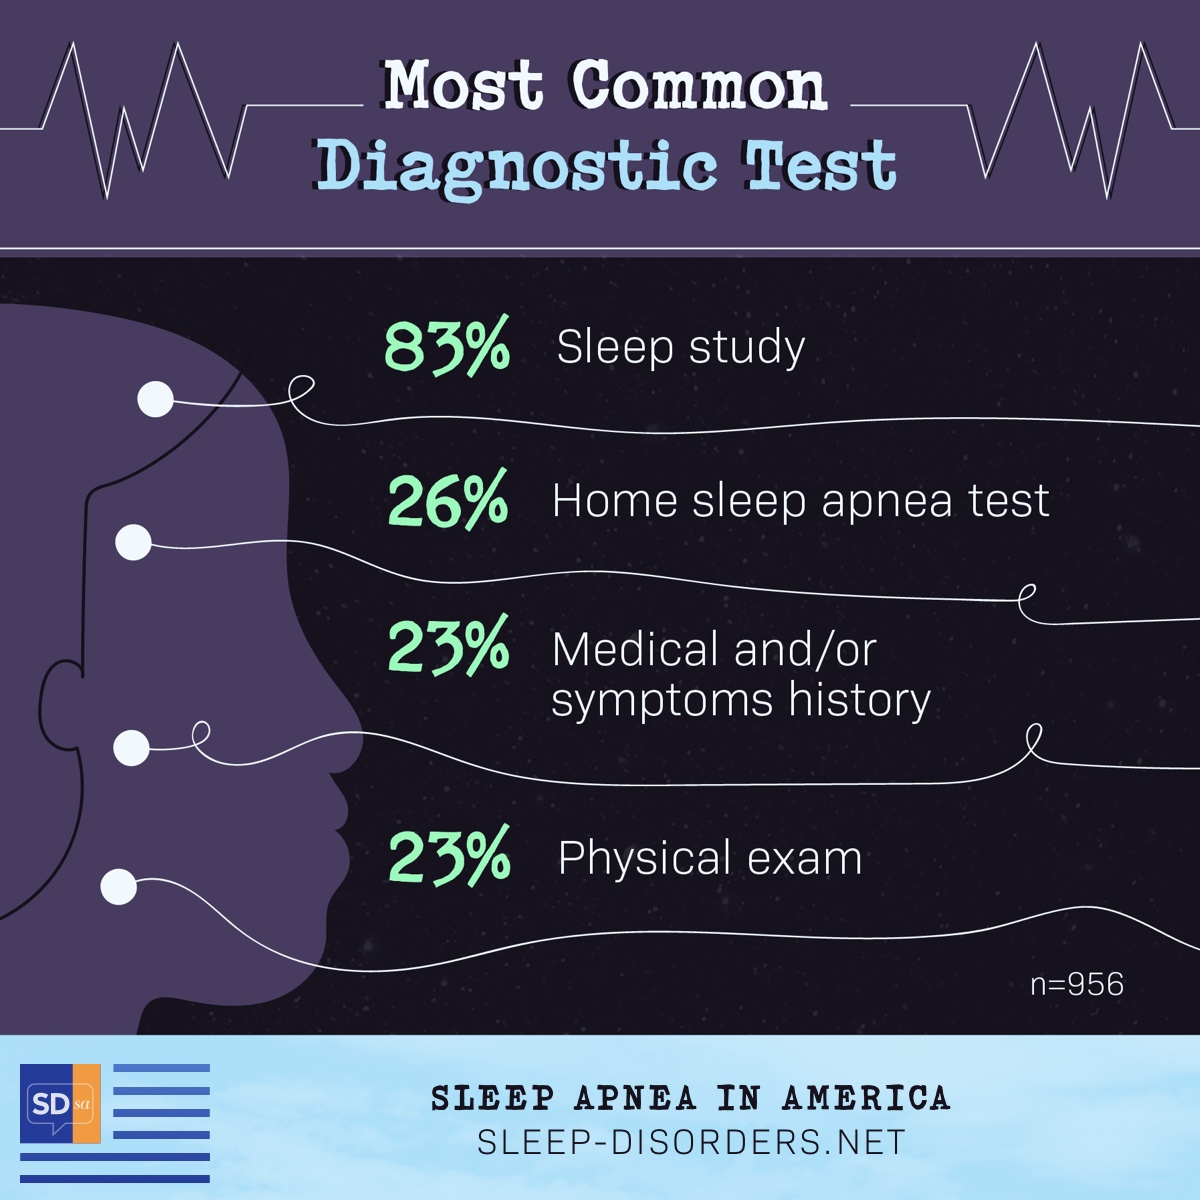 The most common diagnostic test includes sleep study, home sleep apnea test, medical and/or symptom history, physical exam.